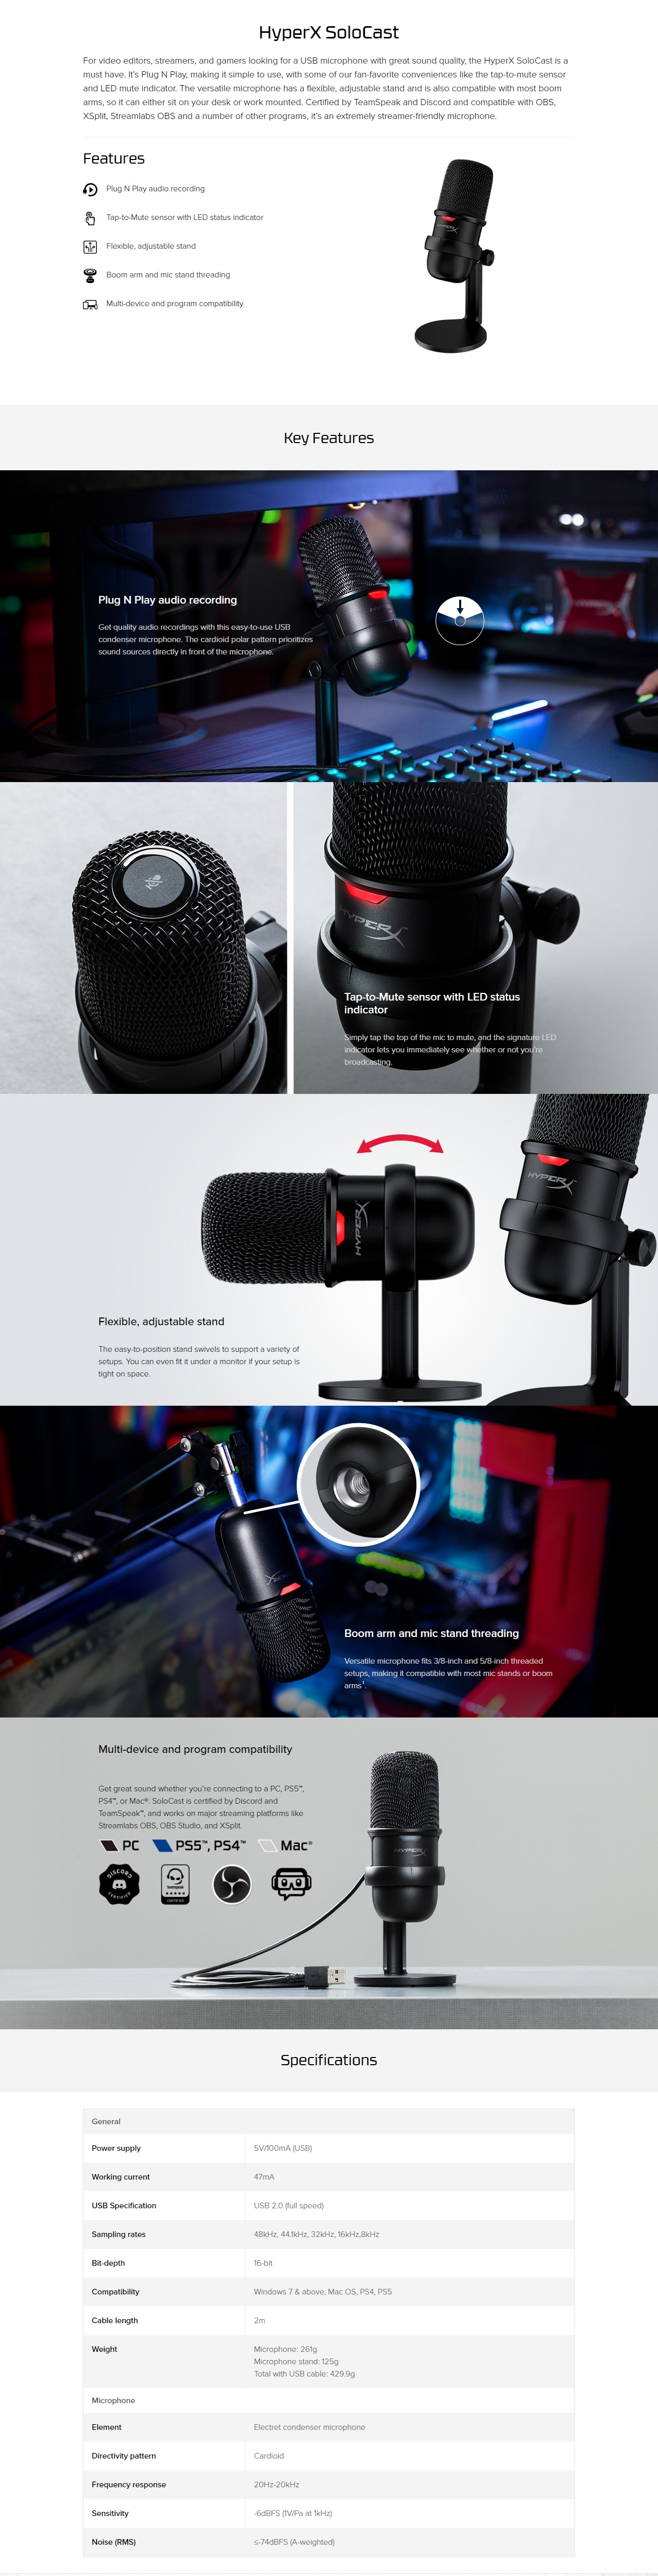 A large marketing image providing additional information about the product HyperX SoloCast - USB Condenser Microphone (Black) - Additional alt info not provided